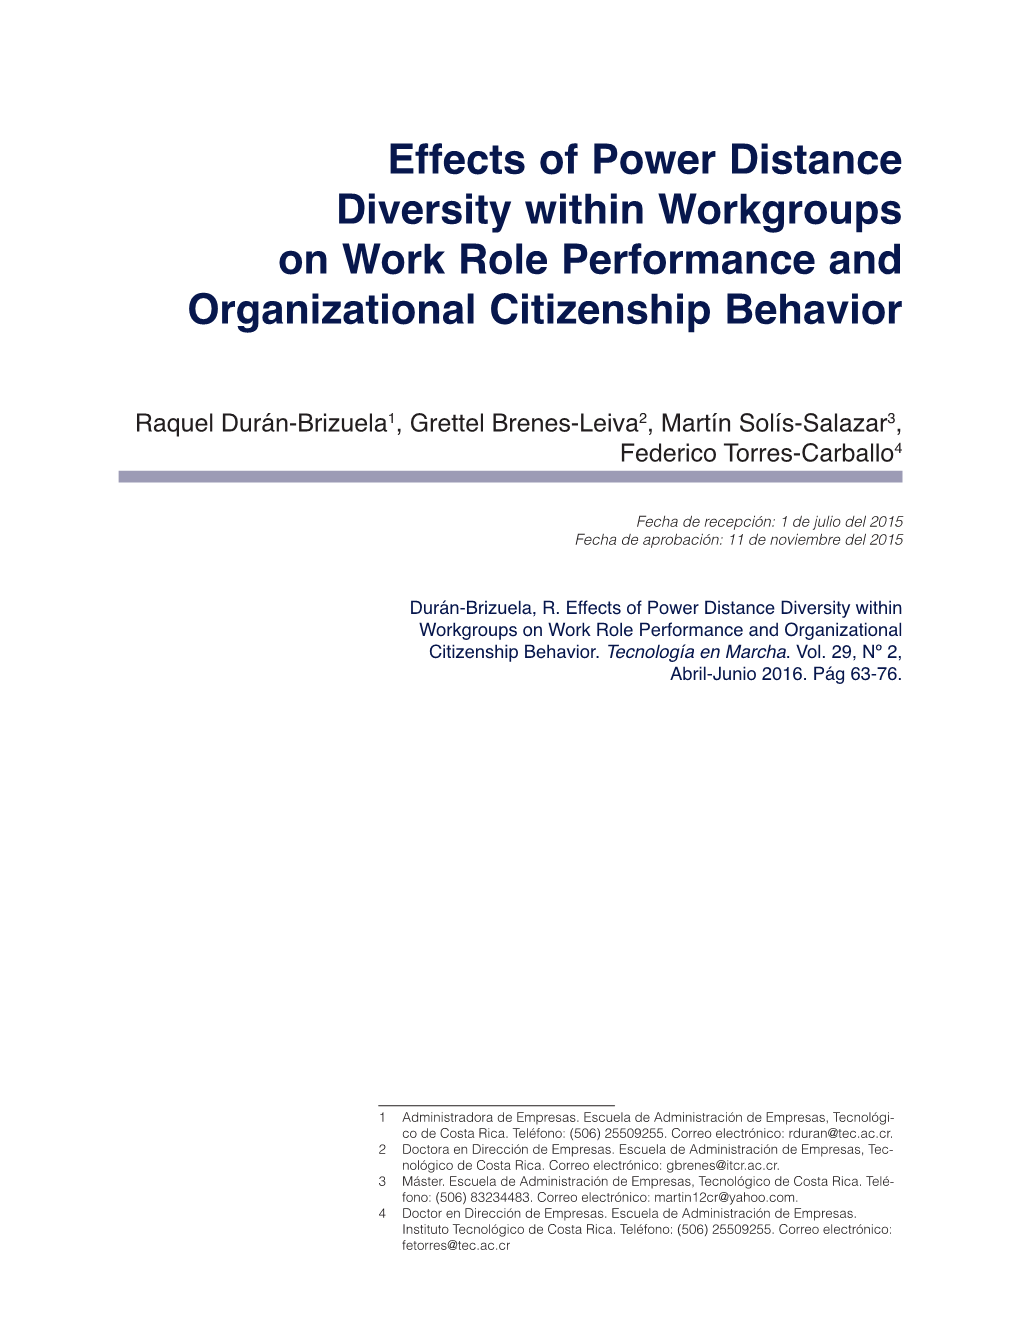 Effects of Power Distance Diversity Within Workgroups on Work Role Performance and Organizational Citizenship Behavior